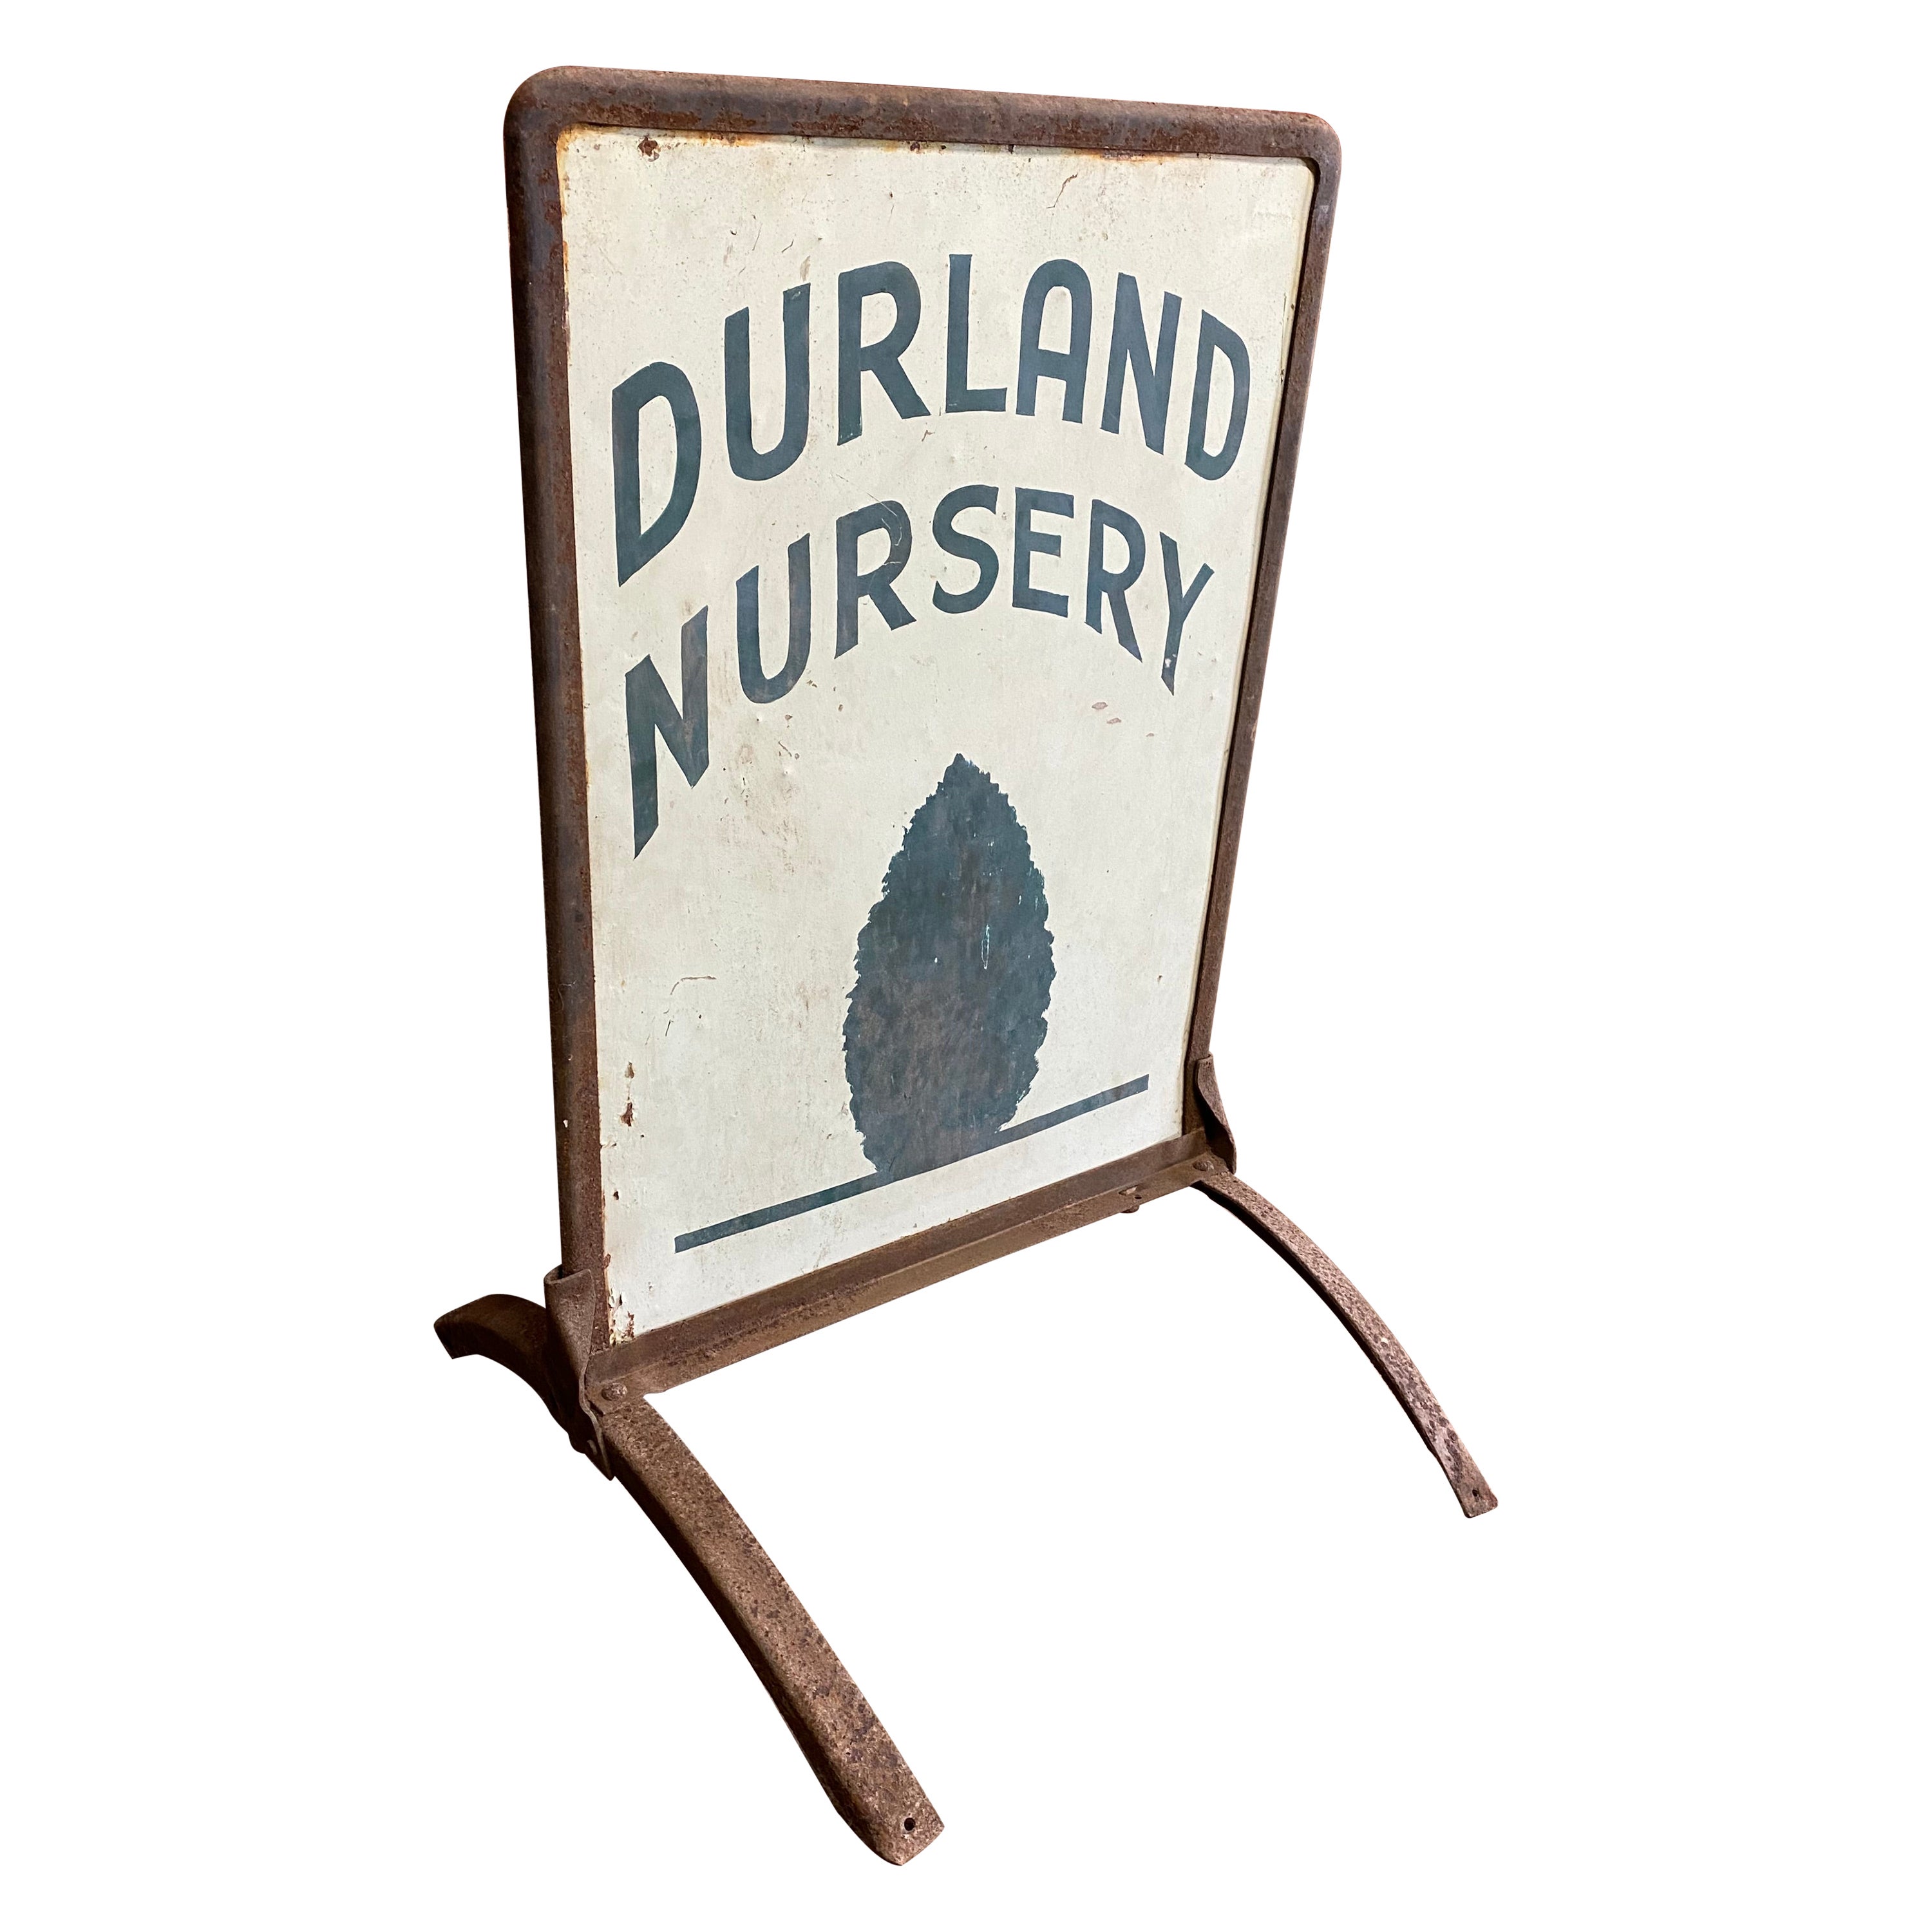 Hand Painted Double Sided Durland Nursery Advertising Sign, 1930s